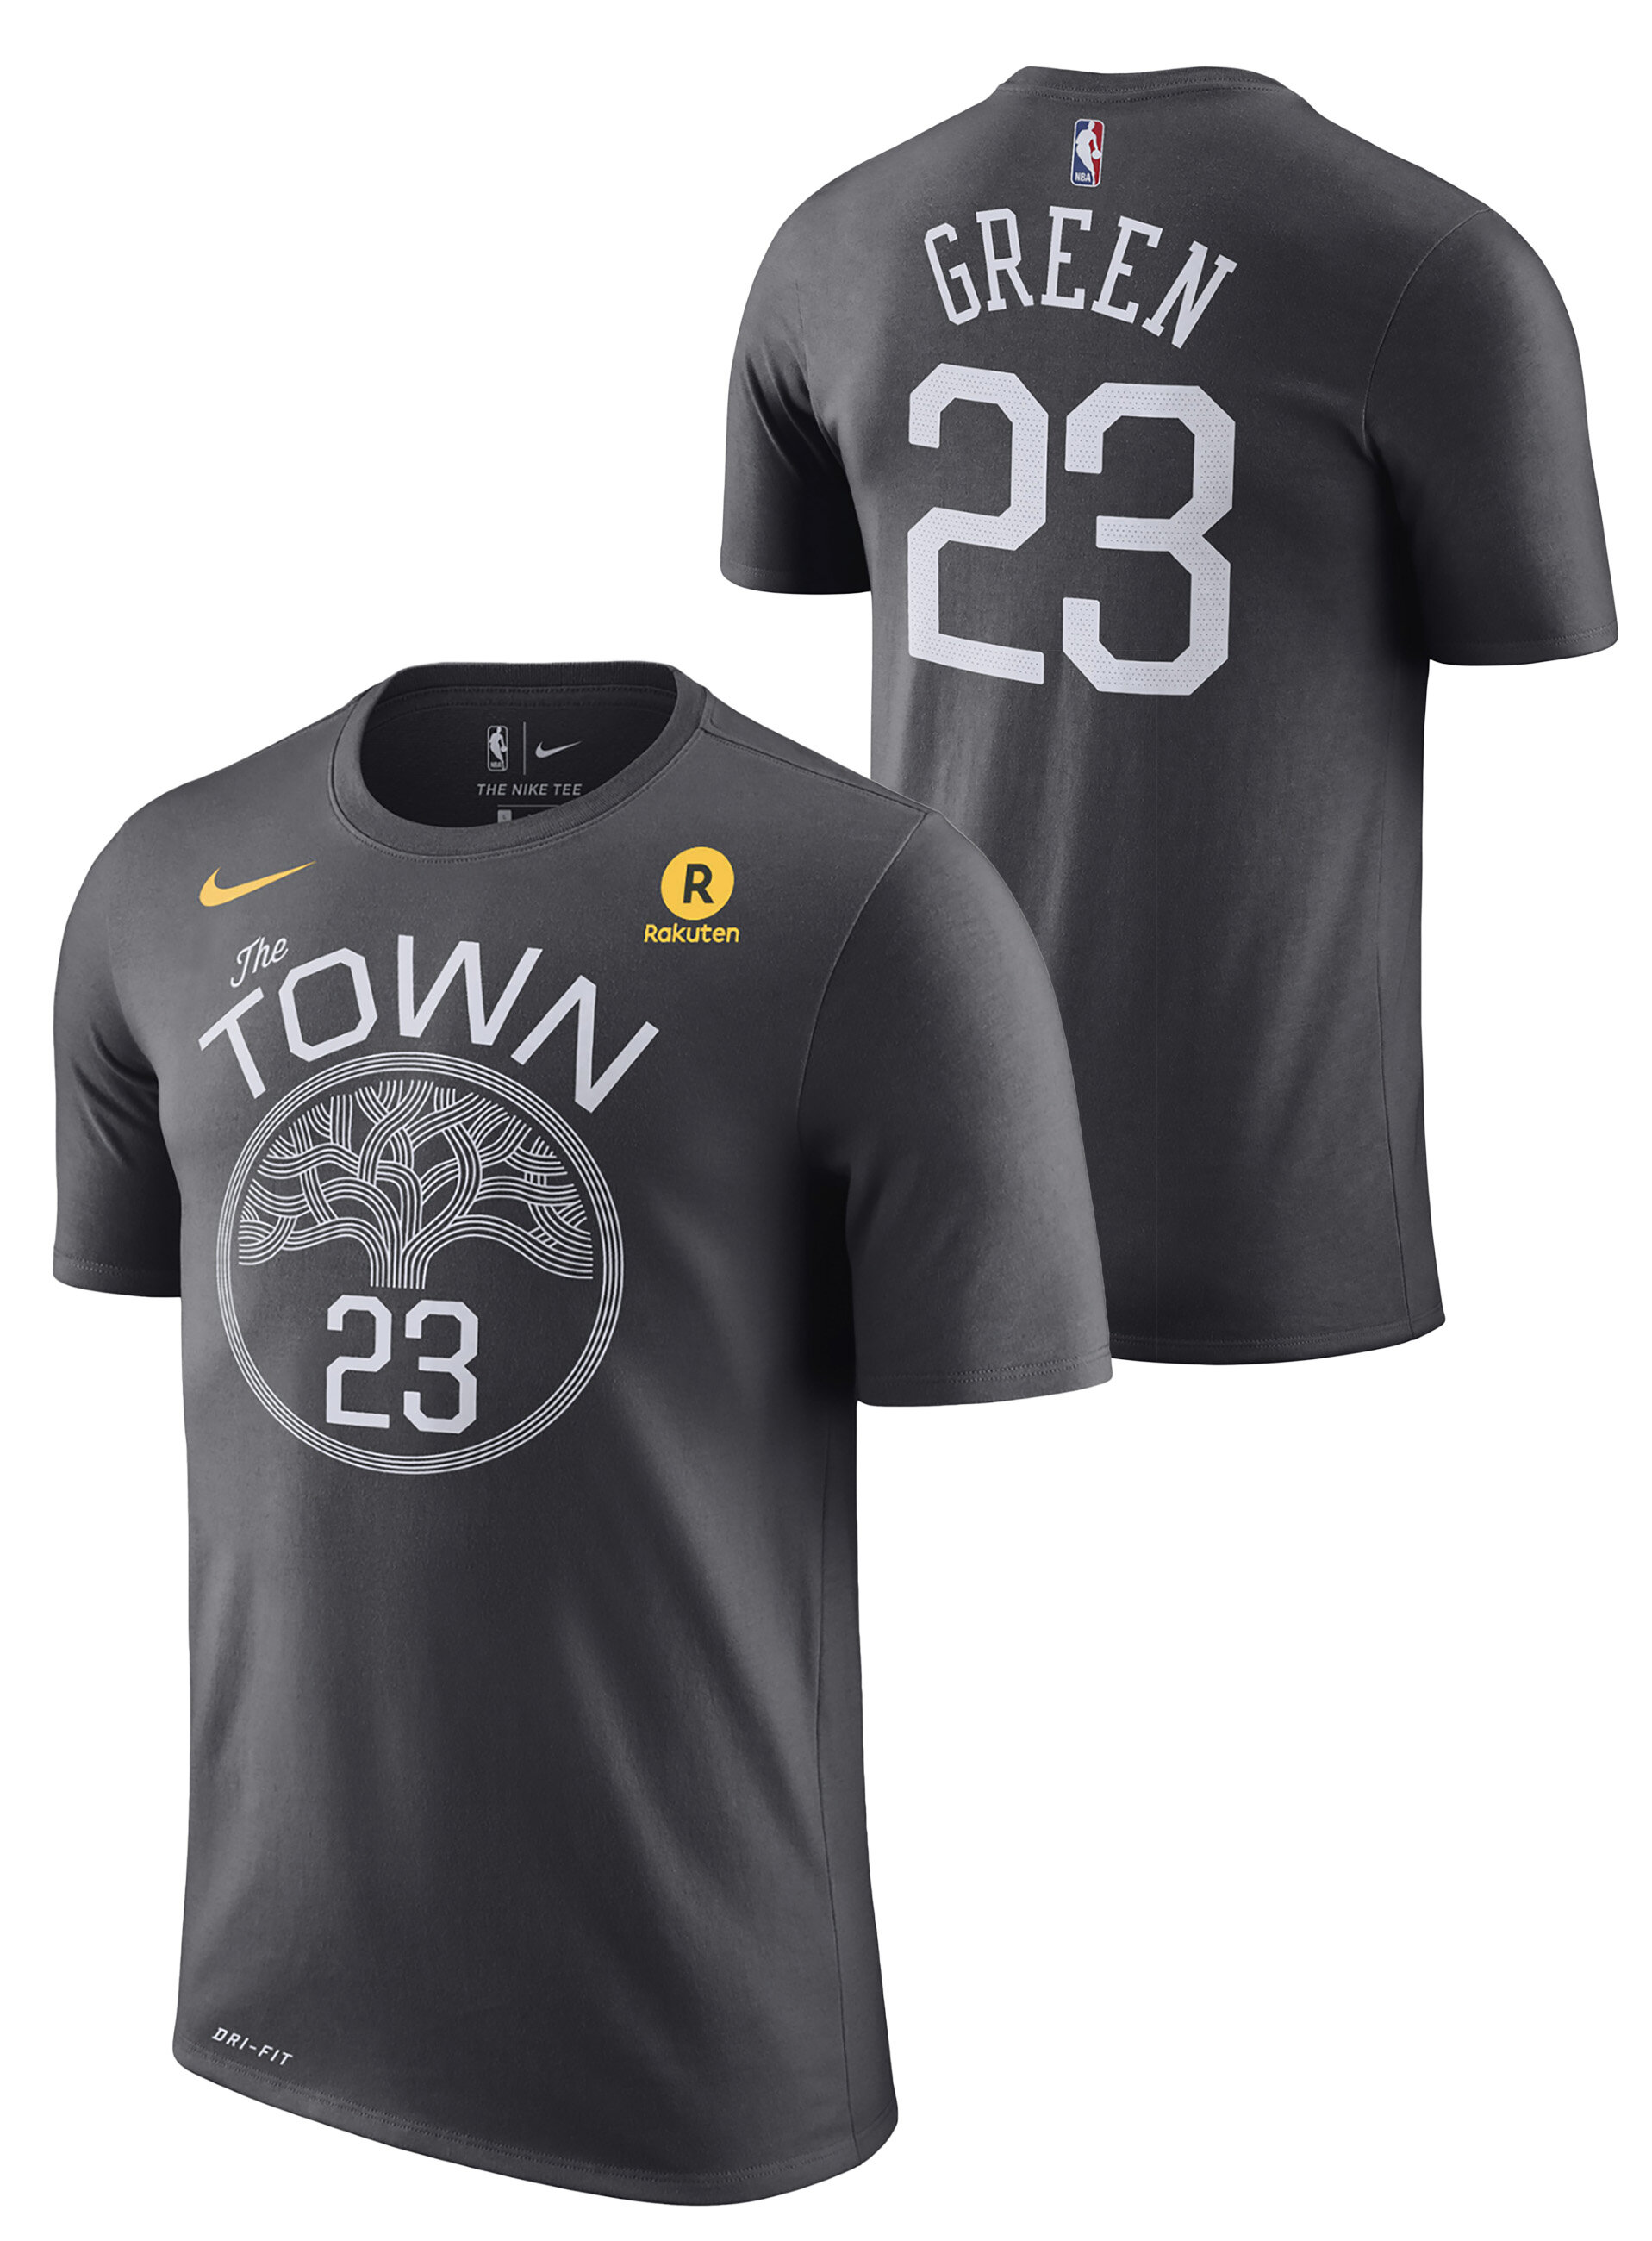 town on golden state warriors jersey